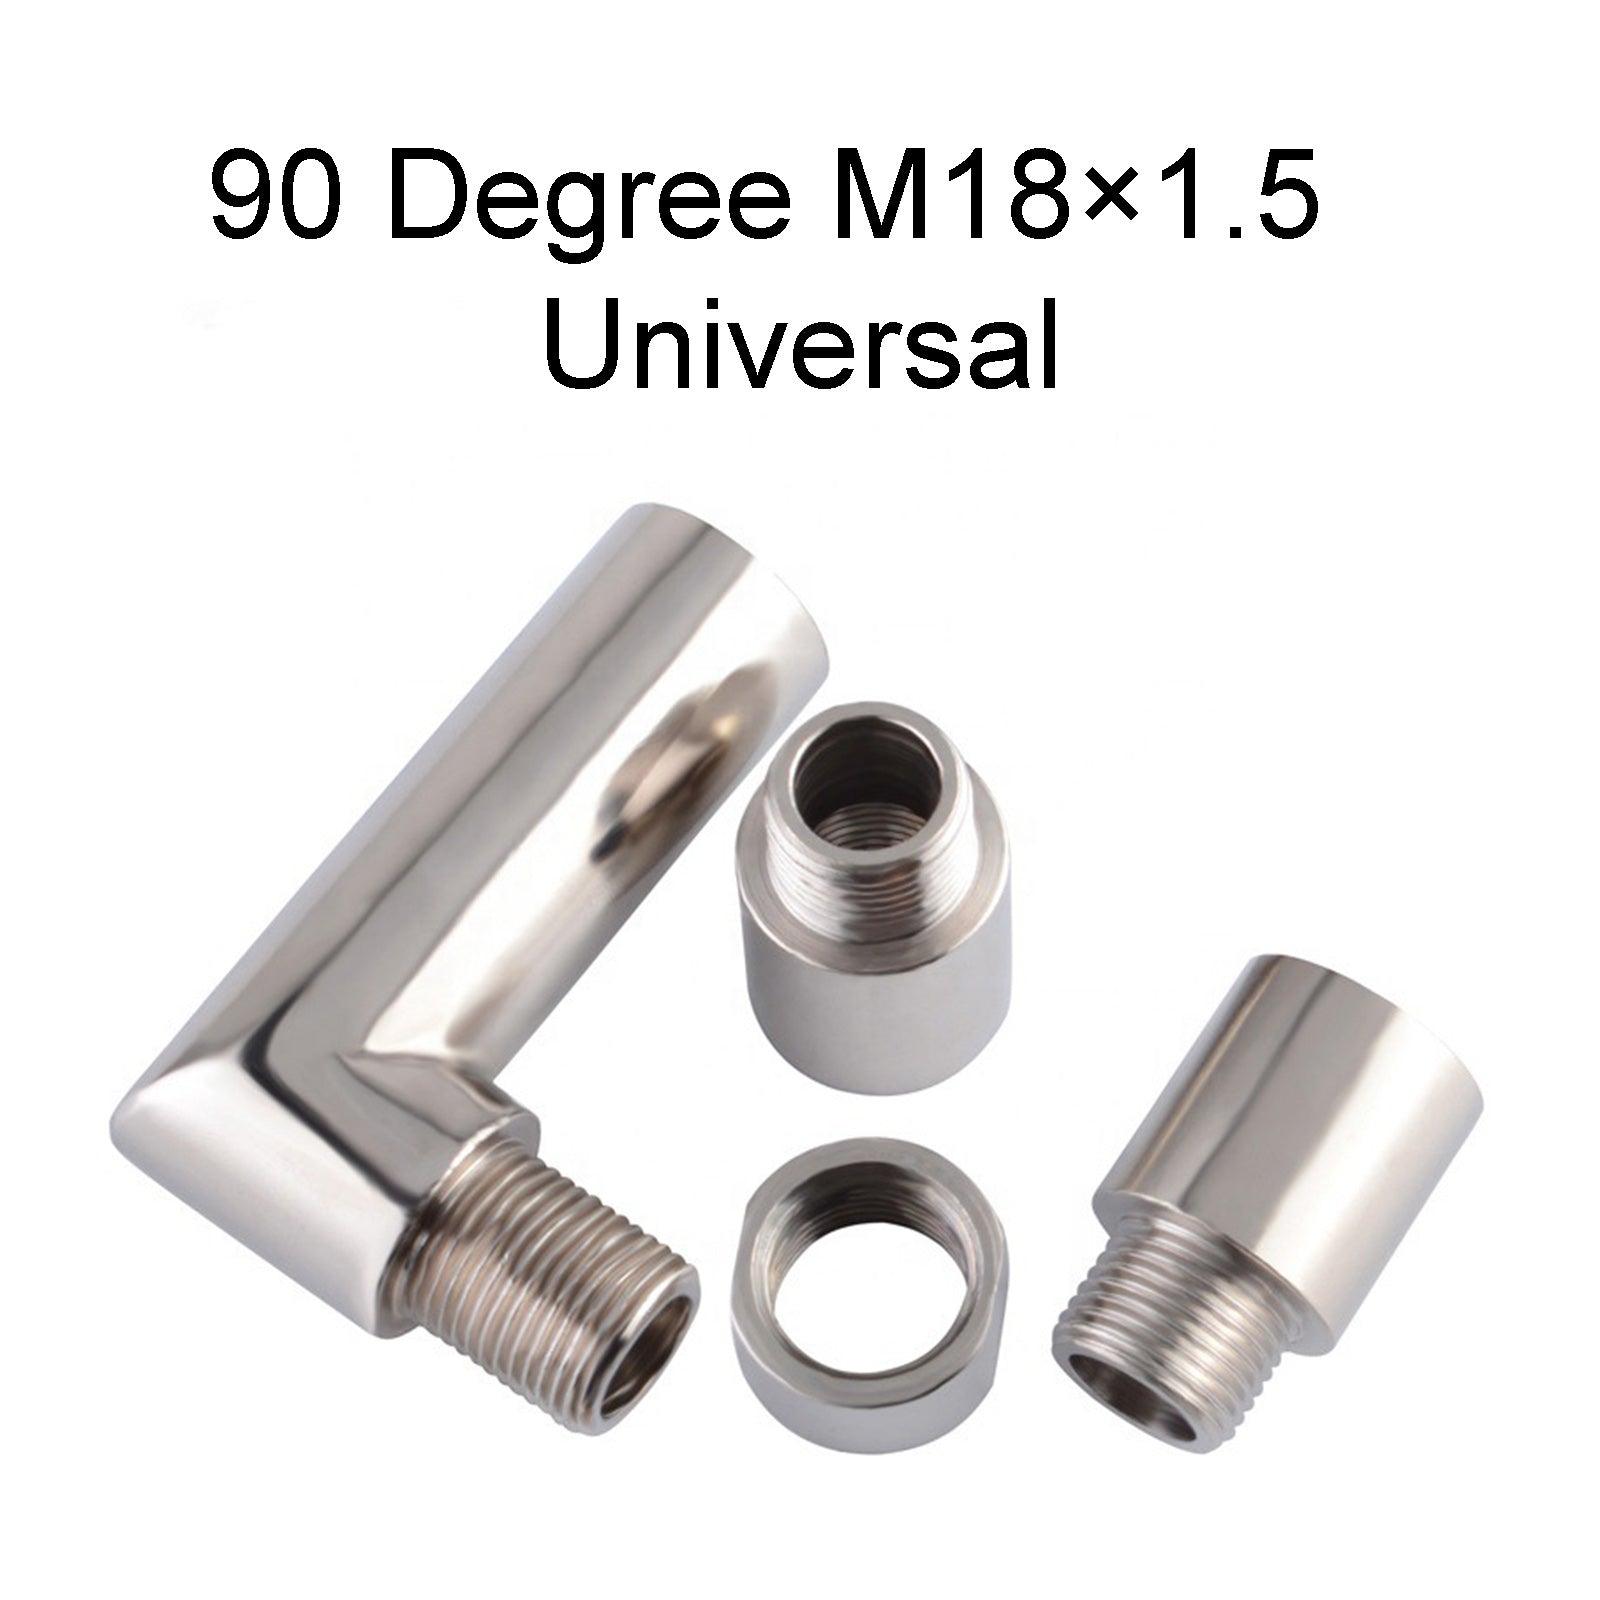 M18 X 1.5 O2 Oxygen Spacer Sensor Angled Extender 90 Degrees 02 Bung Extension